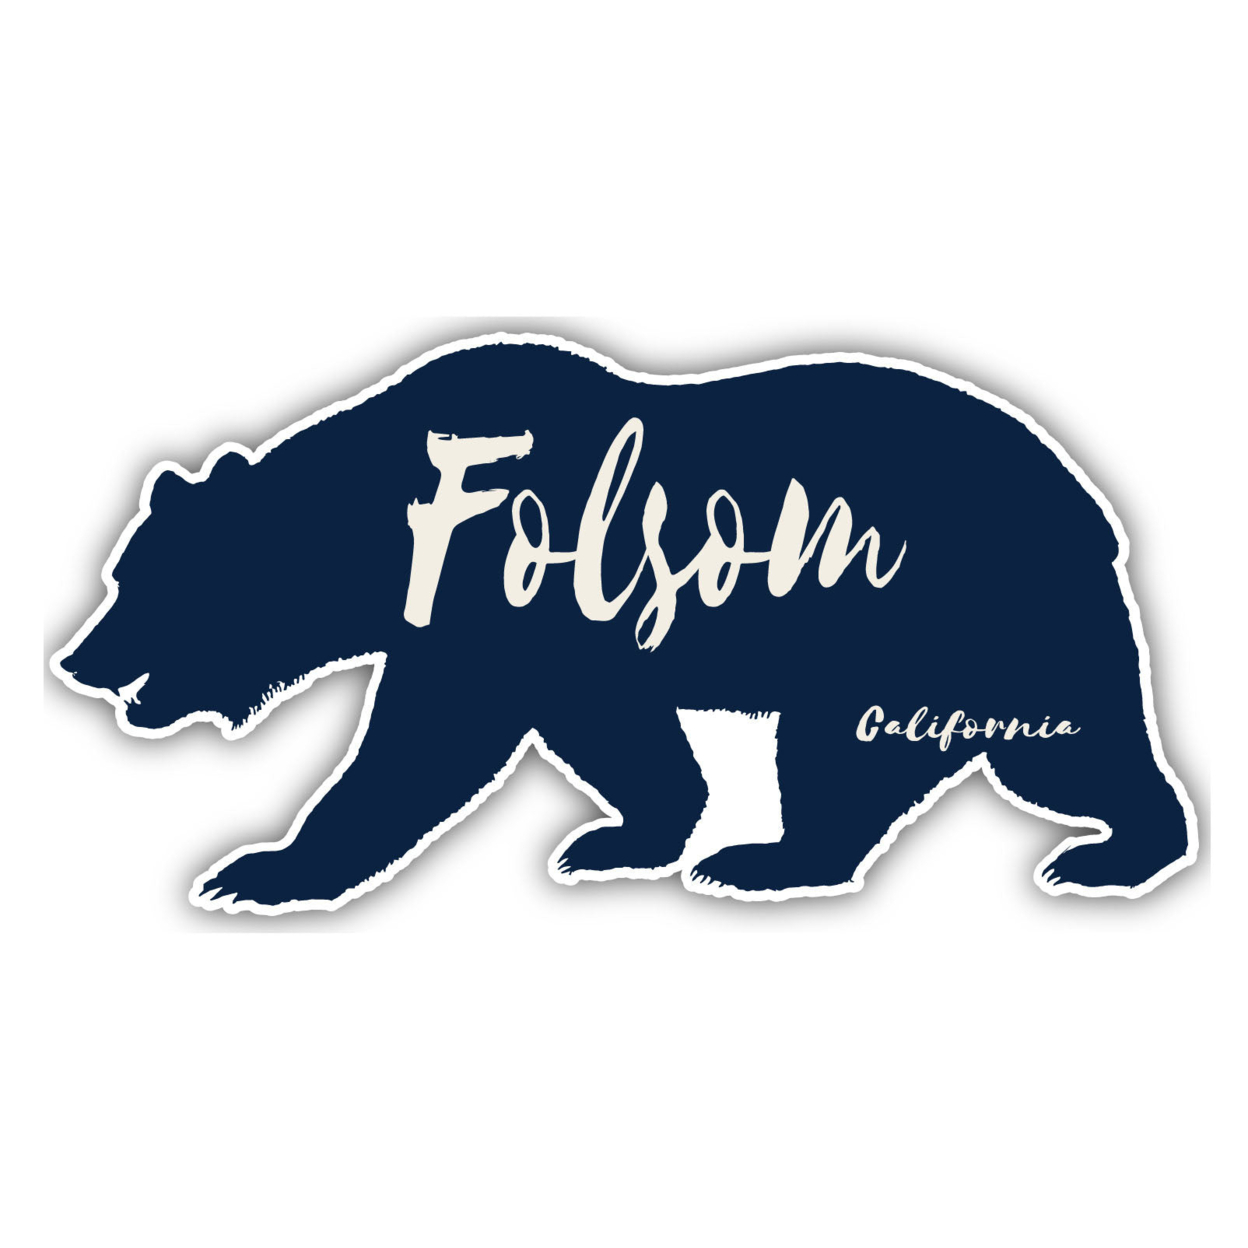 Folsom California Souvenir Decorative Stickers (Choose Theme And Size) - 4-Pack, 2-Inch, Bear